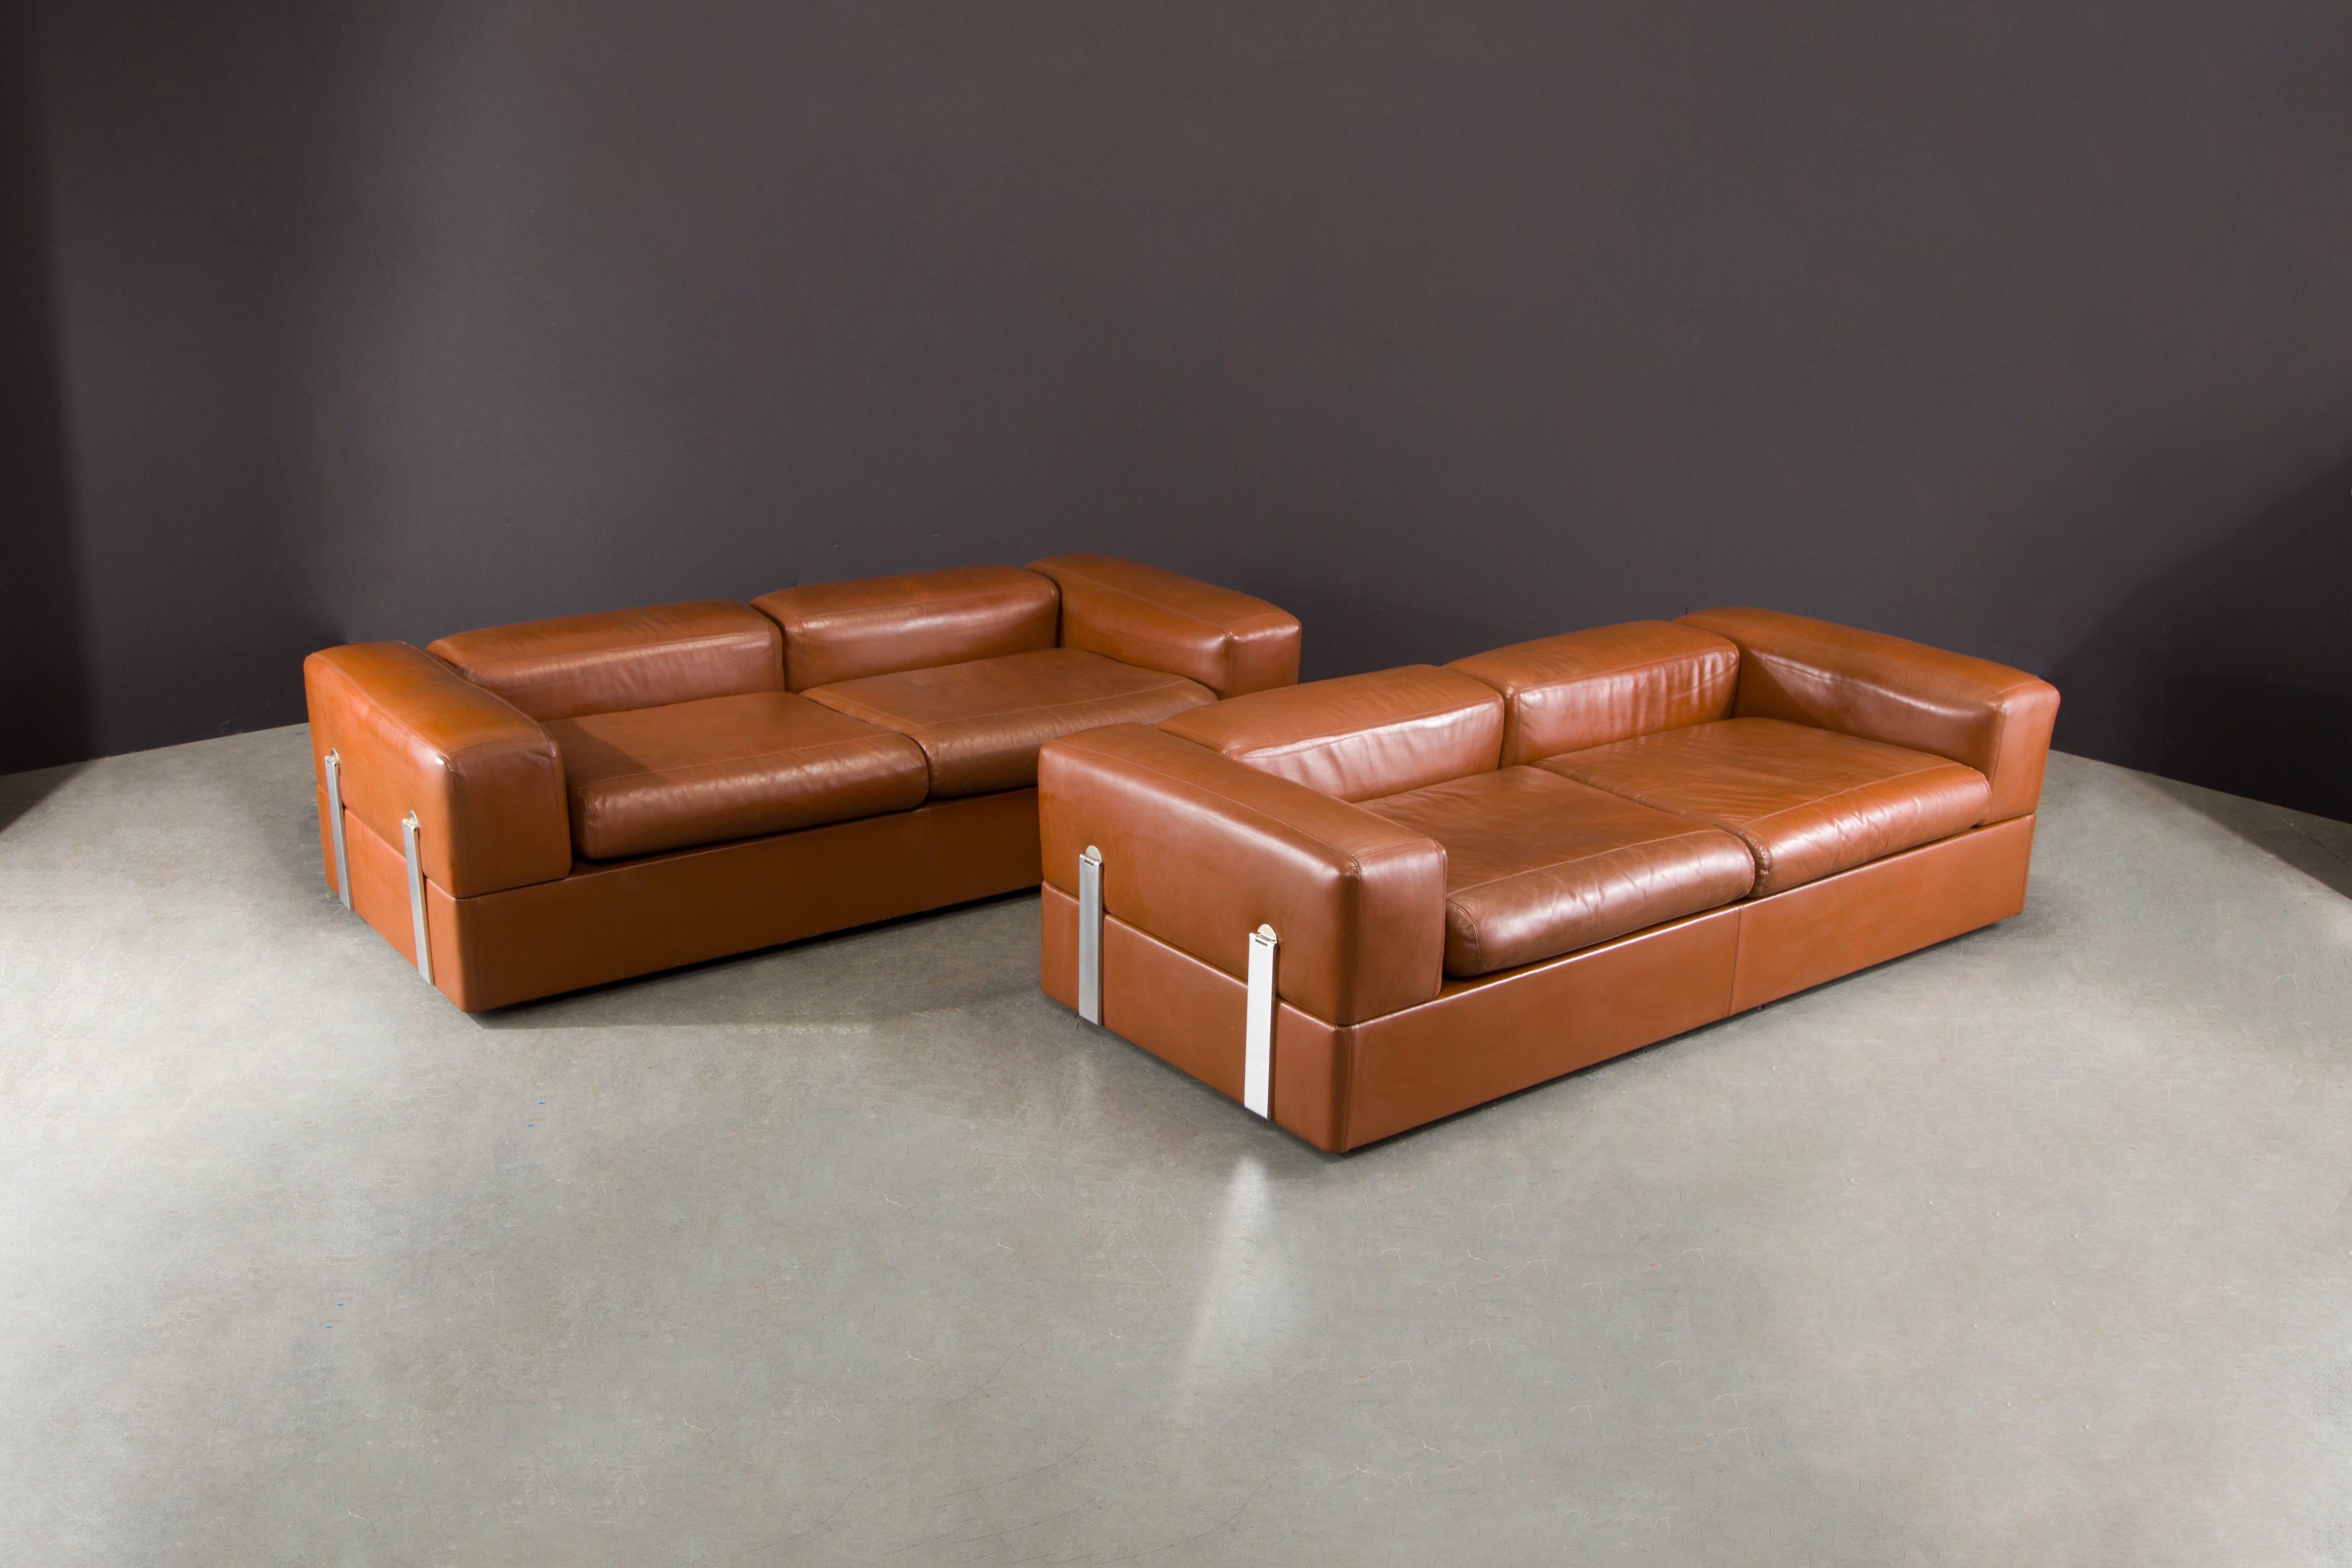 This pair of rare and sought-after Model #711 convertible sofas / beds by Tito Agnoli for Cinova, circa 1960s, feature sumptuous cognac leather, sleek steel hardware and built-in white laminated side tables. This innovative design transforms from a